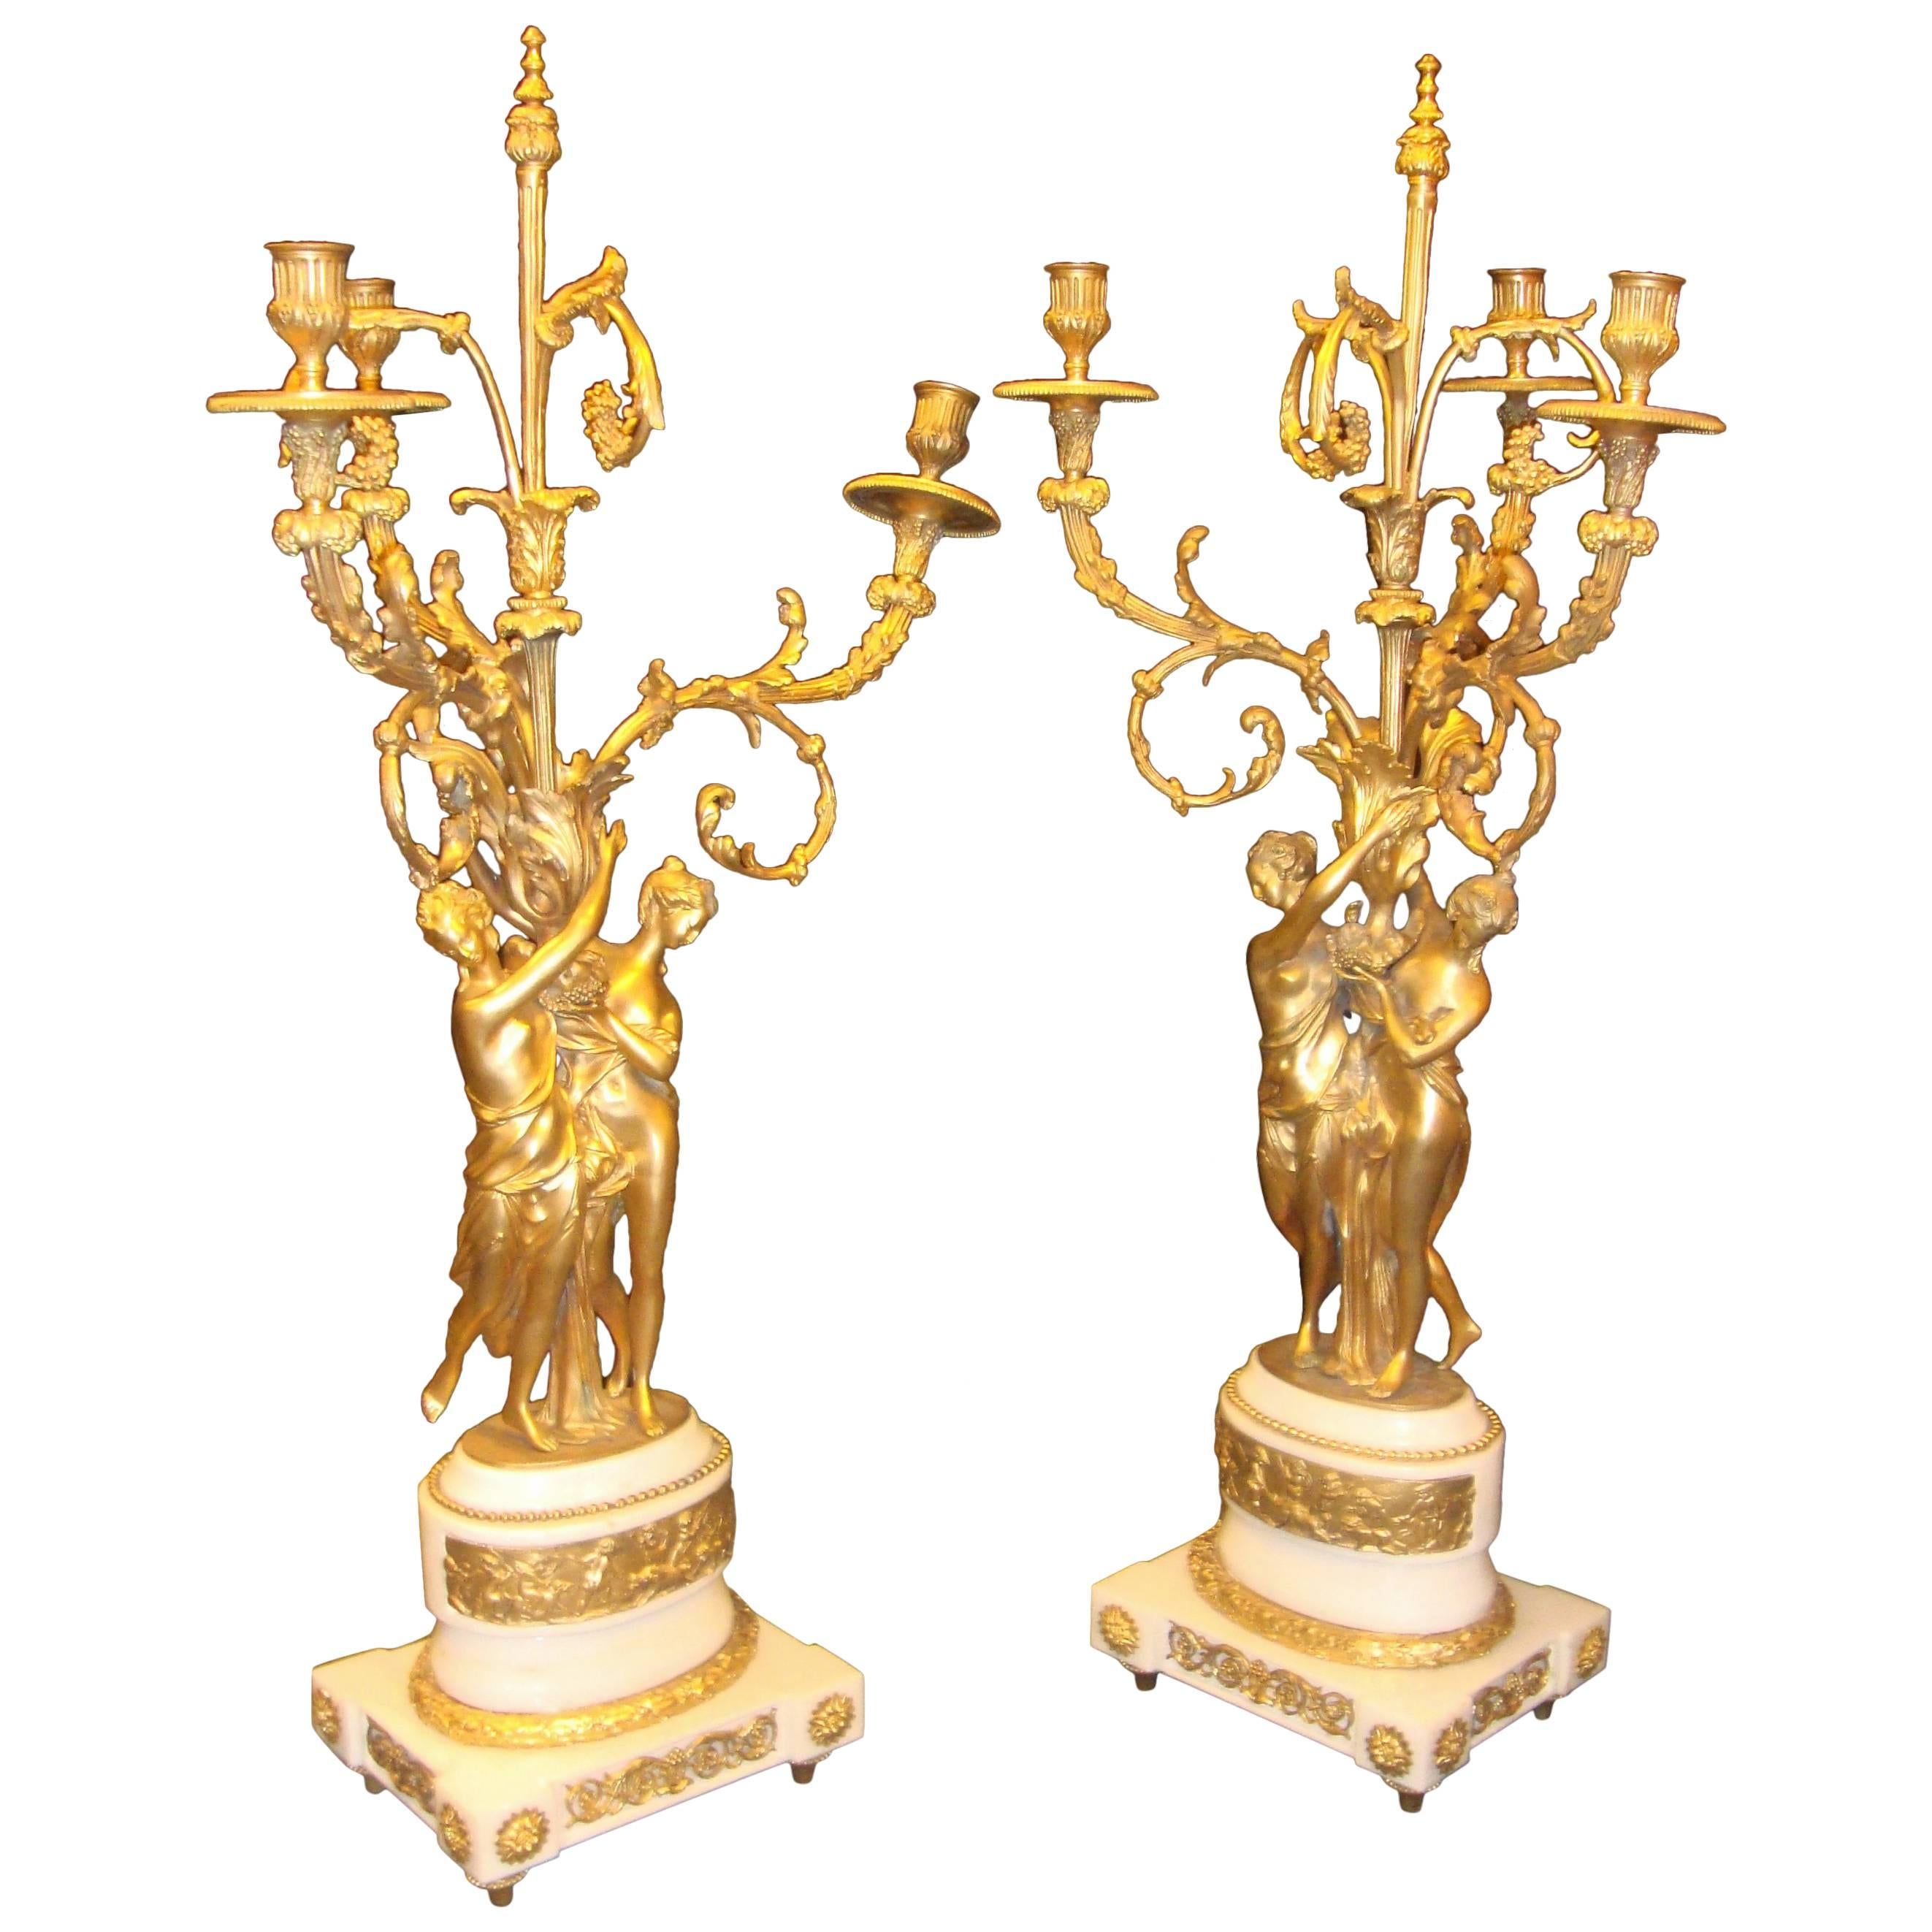 Pair of Figural Bronze Candelabras on Marble Bases